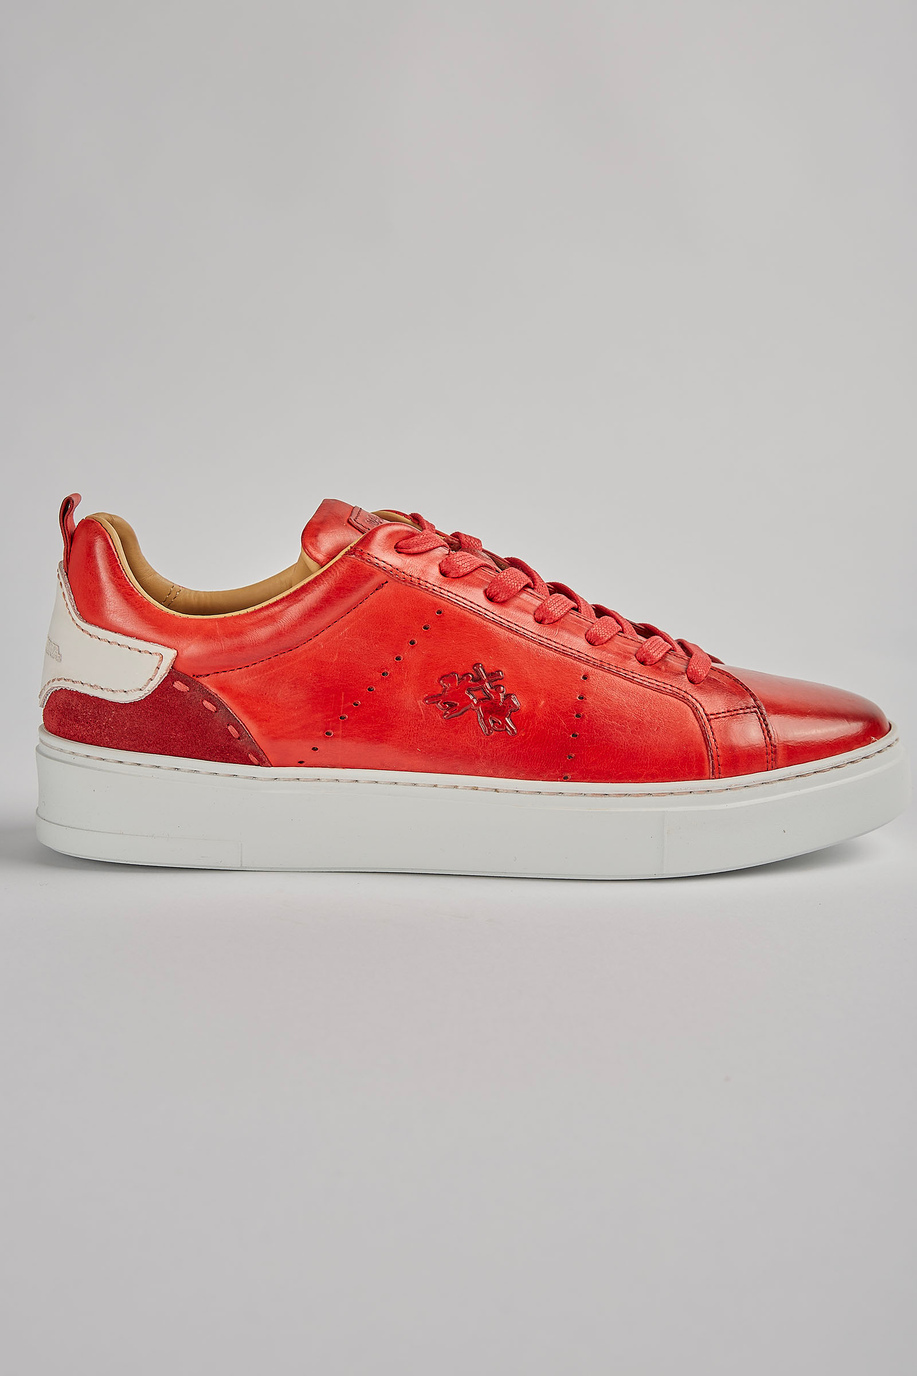 Vegetable eco-leather sneaker - Sneakers | La Martina - Official Online Shop